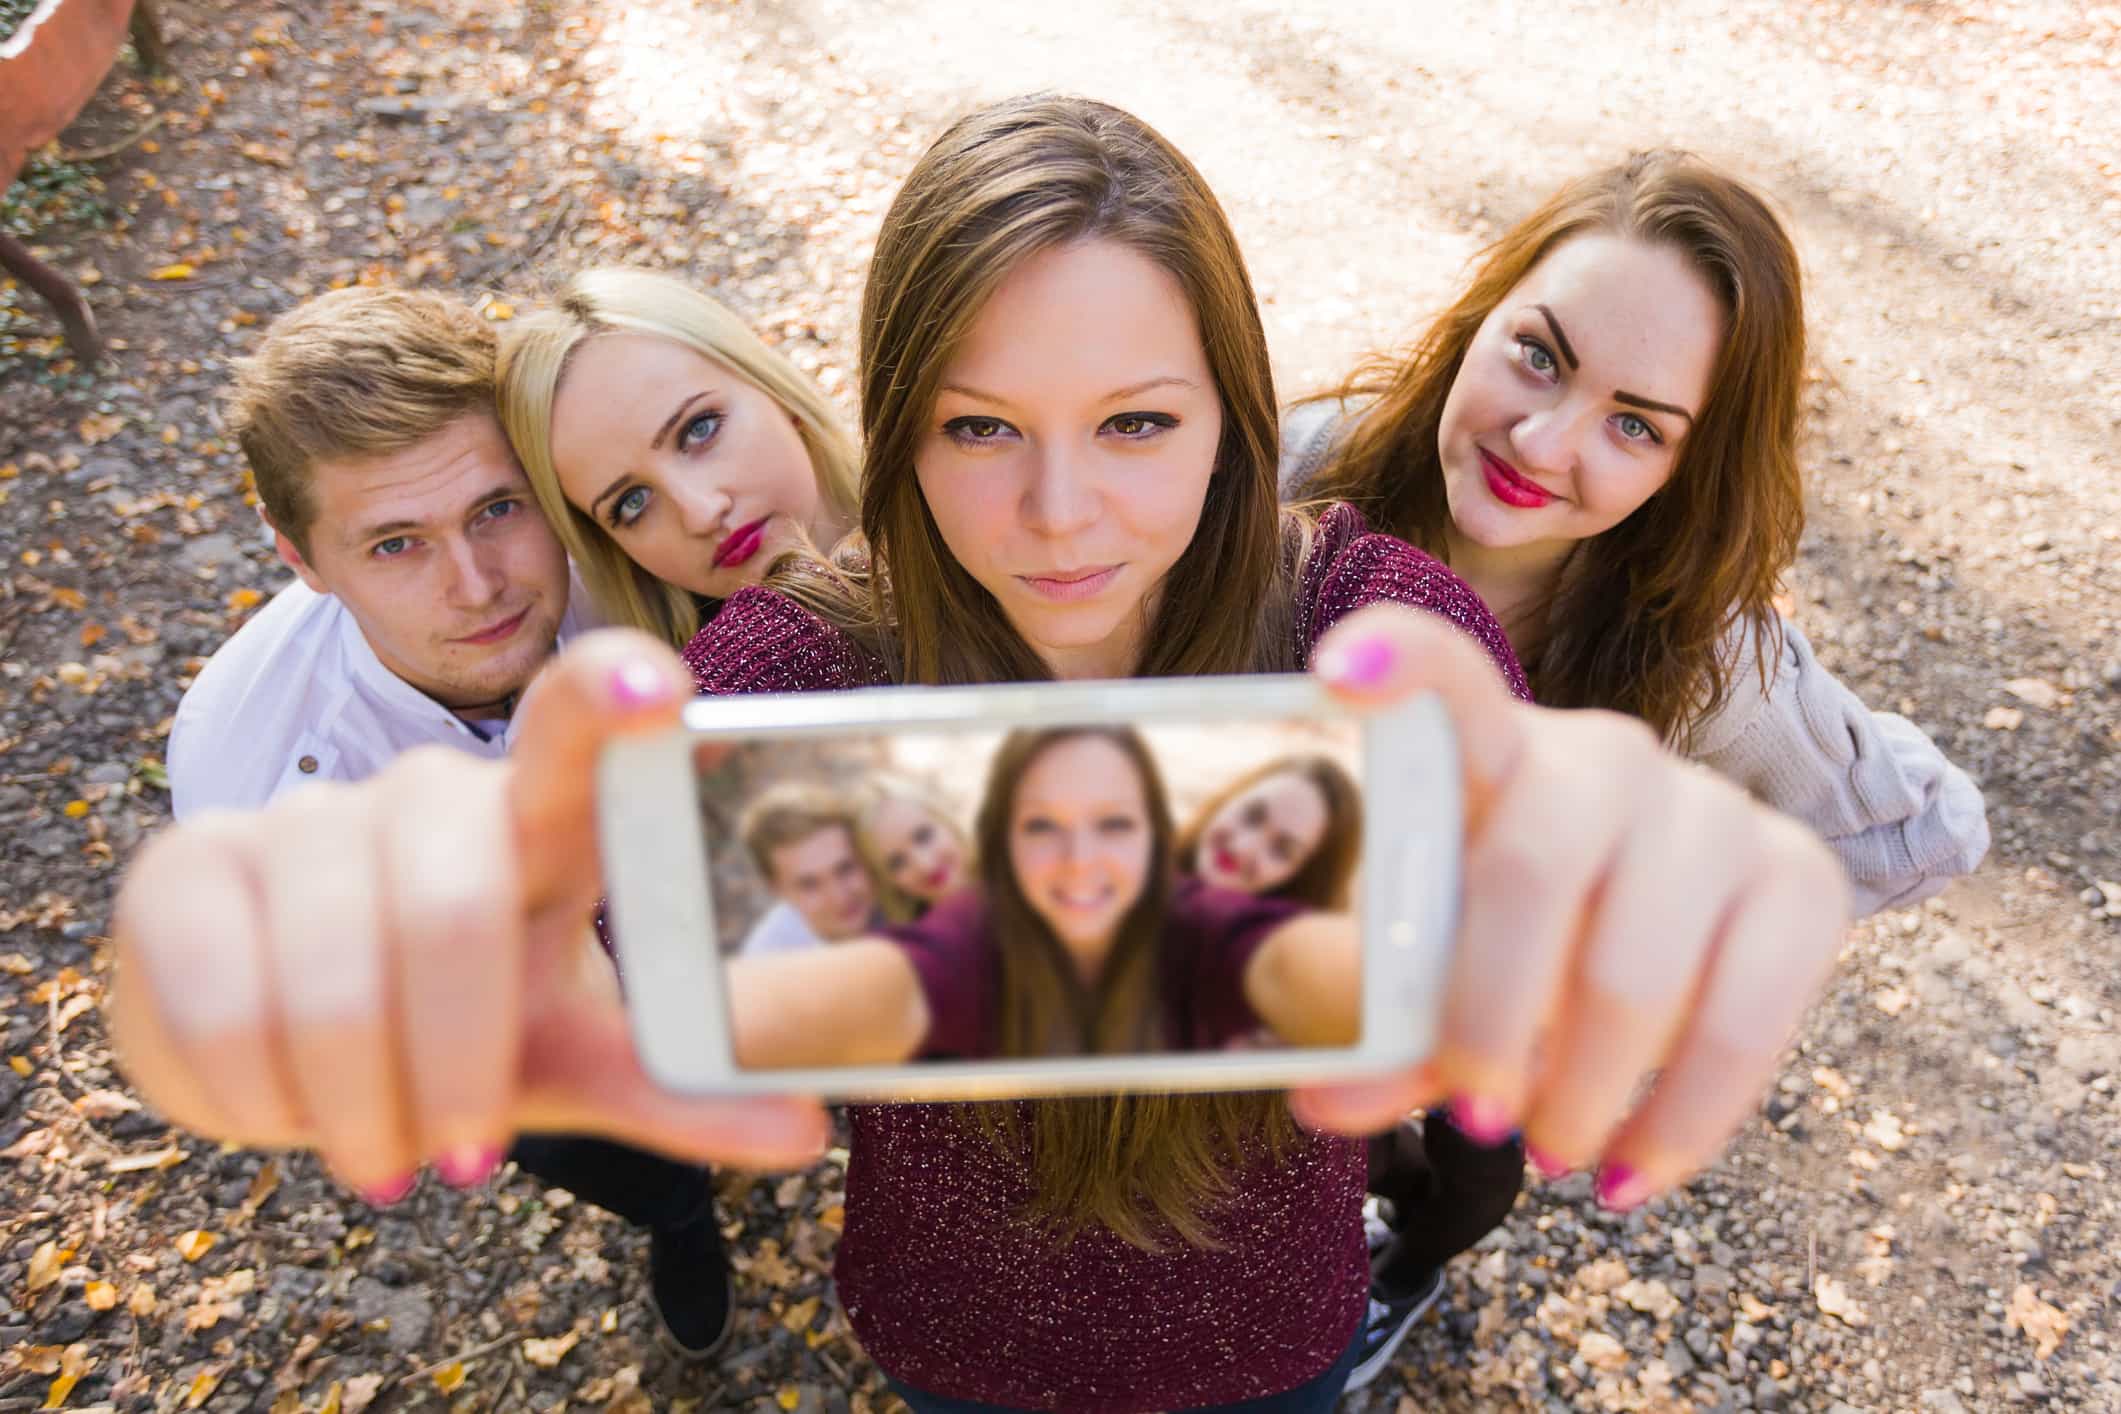 Selfie obsessions – What’s it all about?